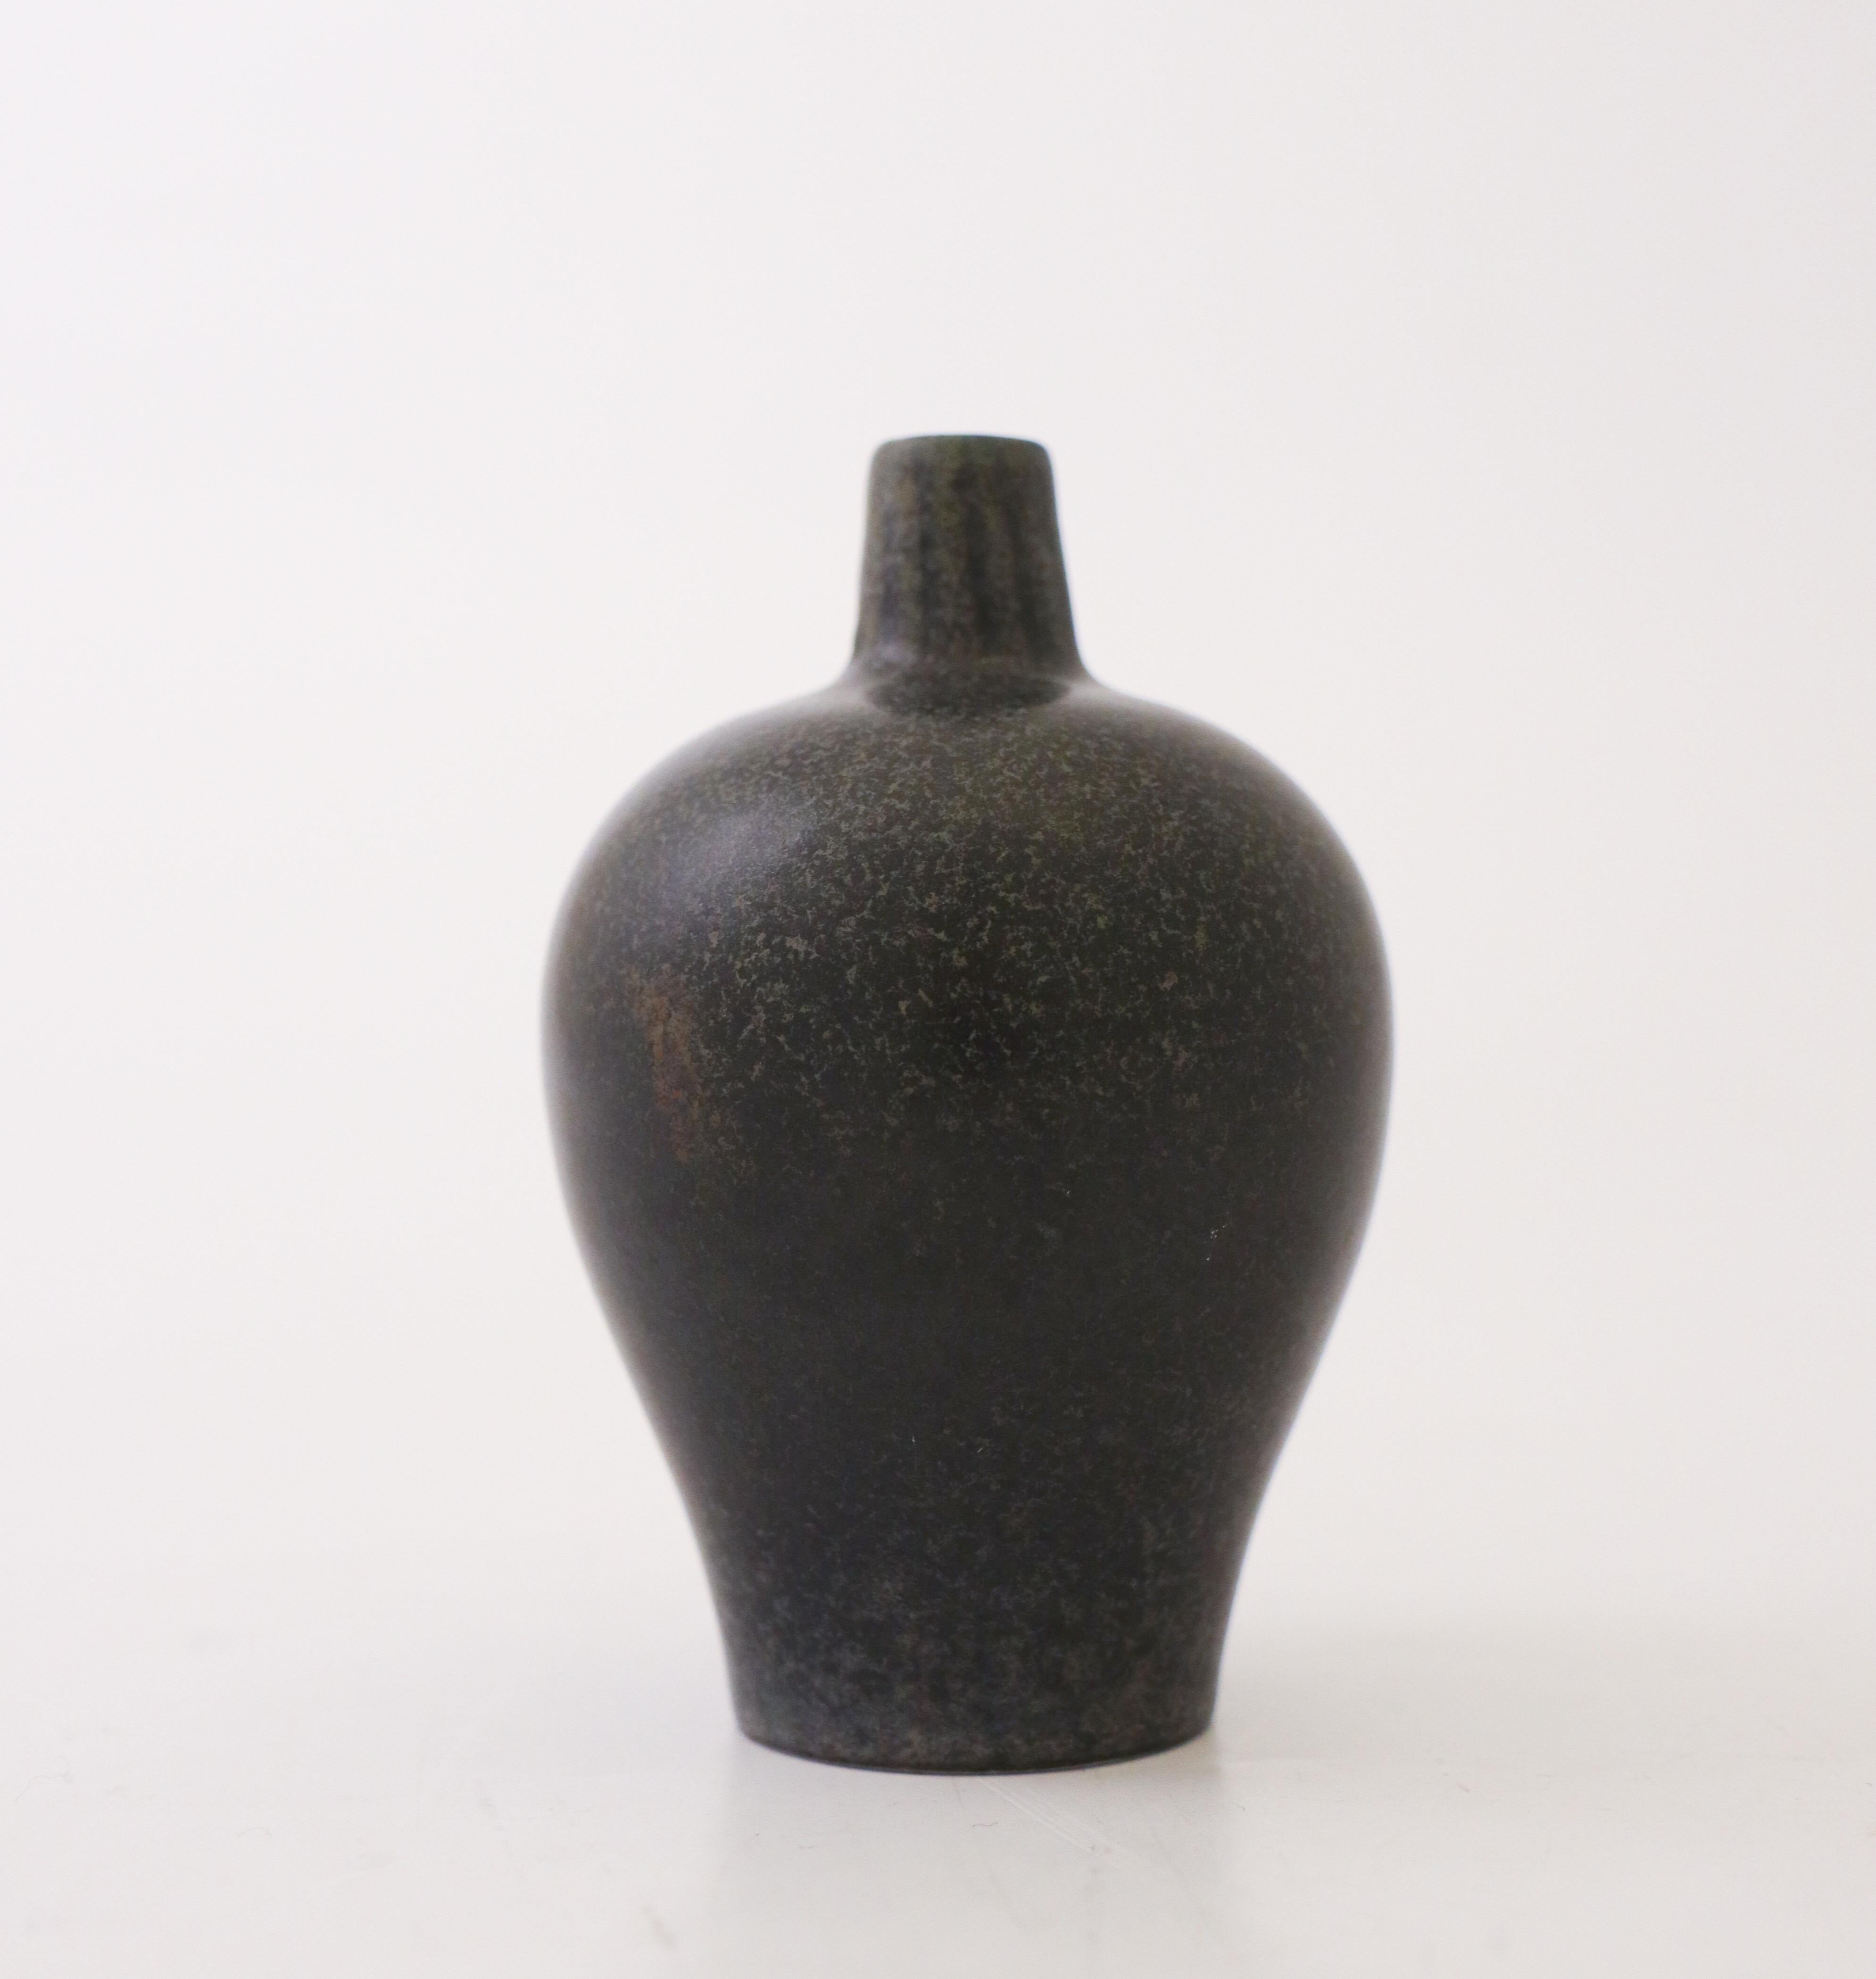 A vase with a lovely black glaze designed by Gunnar Nylund at Rörstrand, the vase is 9 cm (3.6